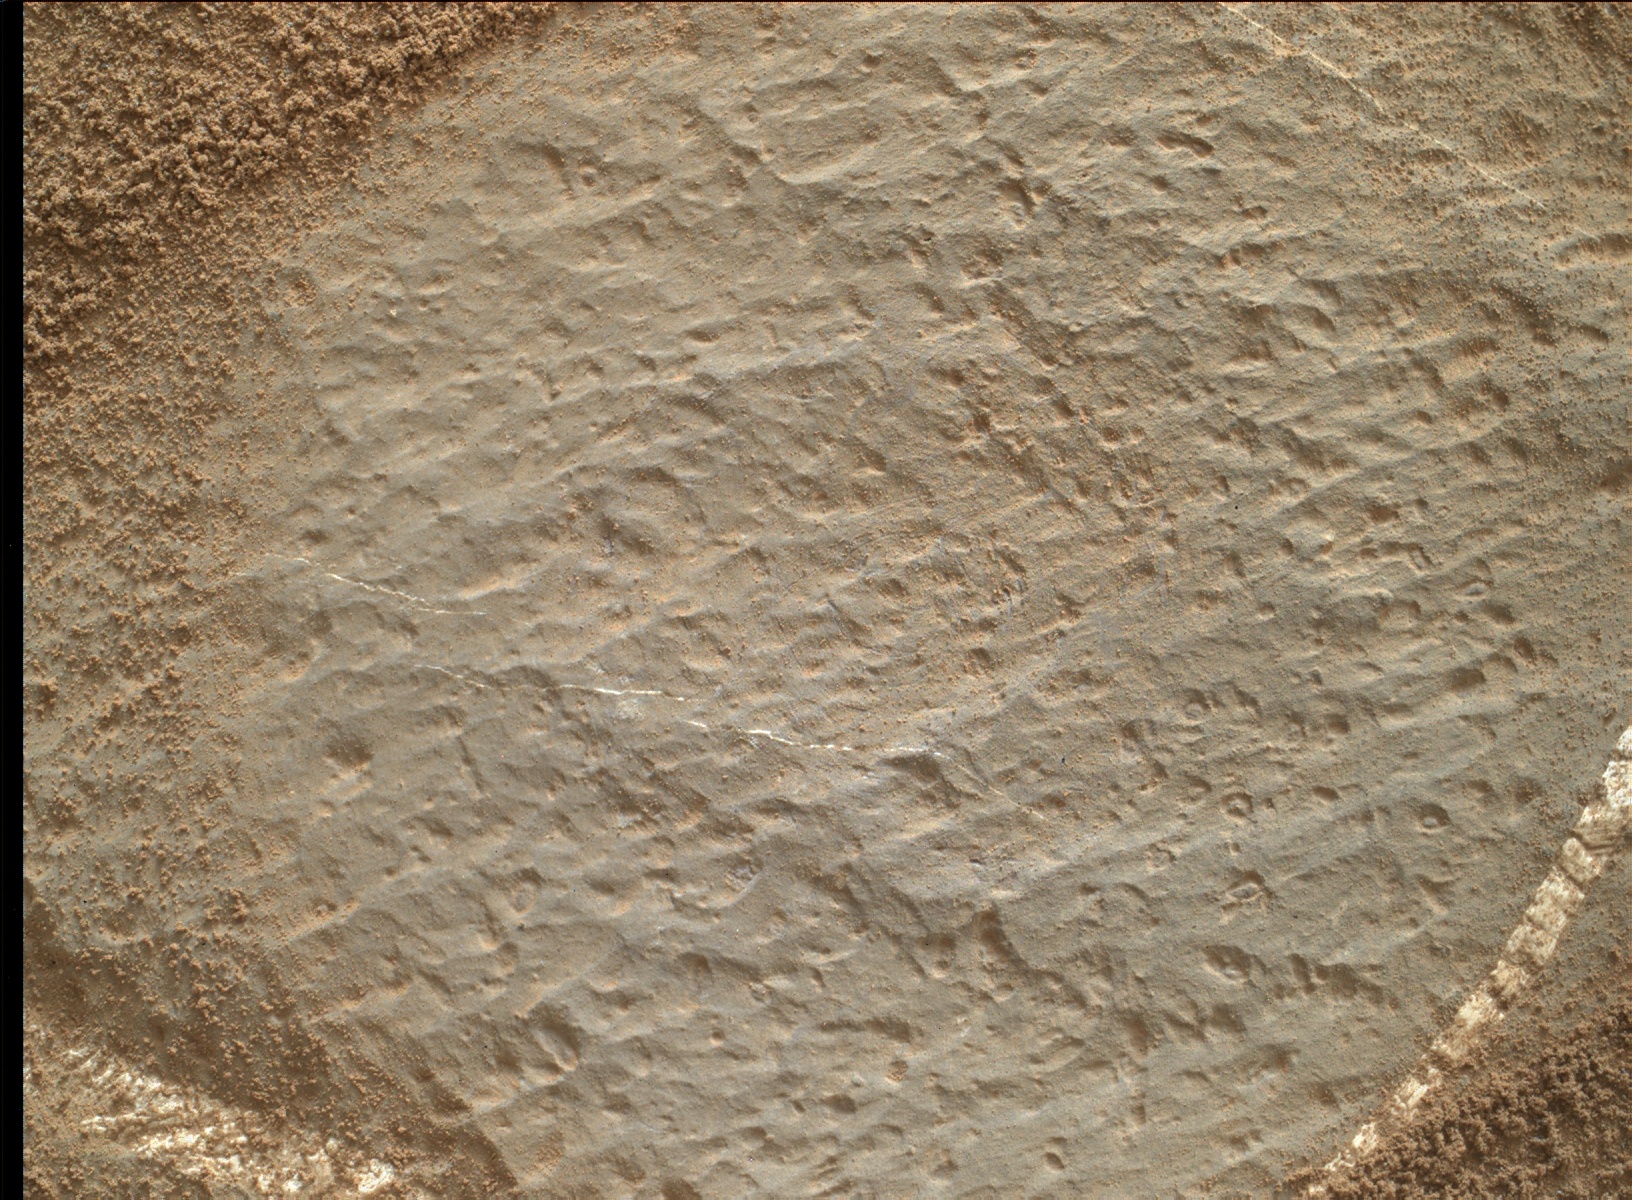 Nasa's Mars rover Curiosity acquired this image using its Mars Hand Lens Imager (MAHLI) on Sol 1358